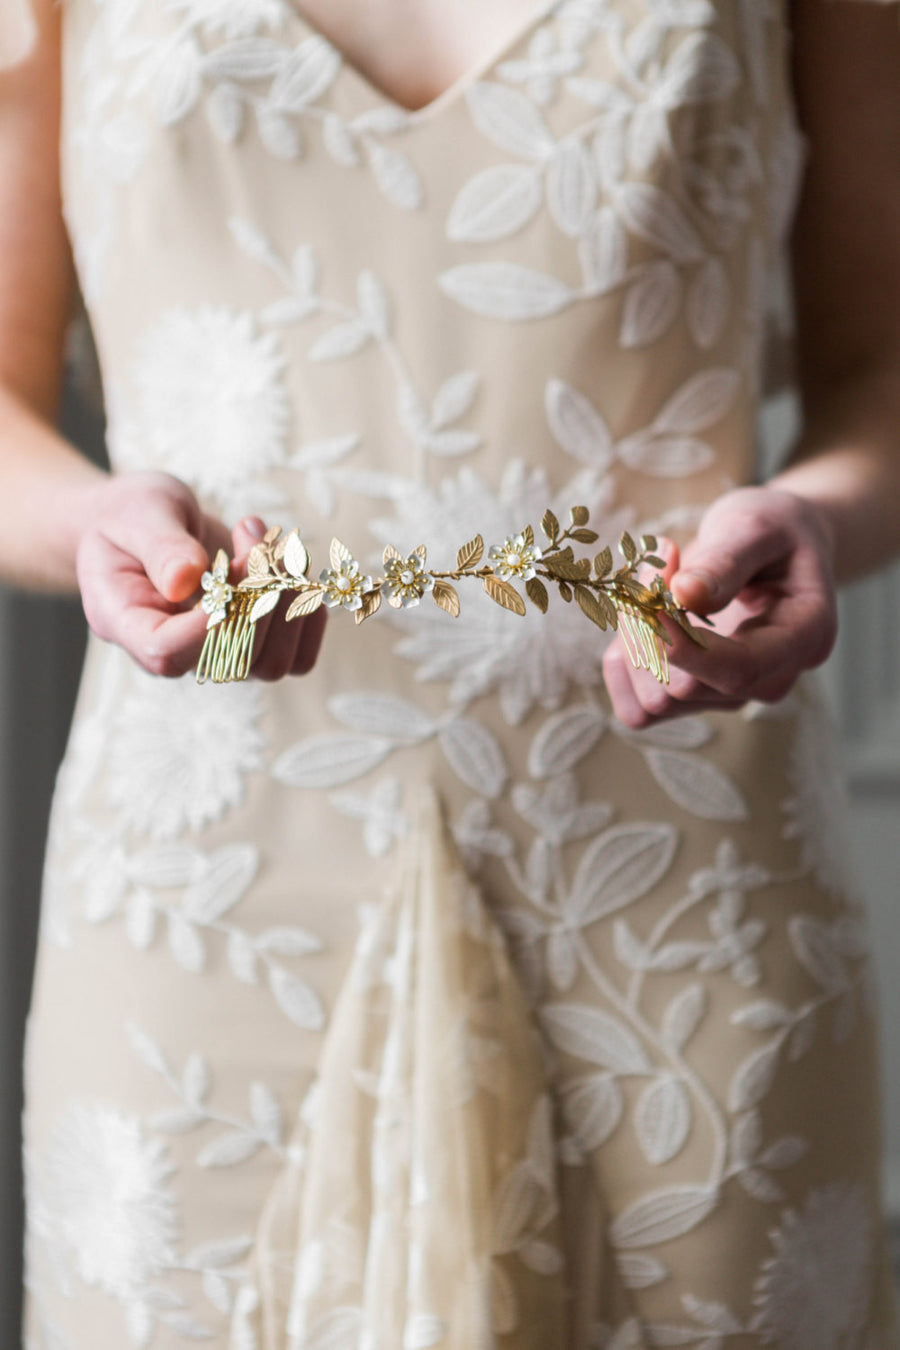 Bride wearing bridal headpiece made of gold vines